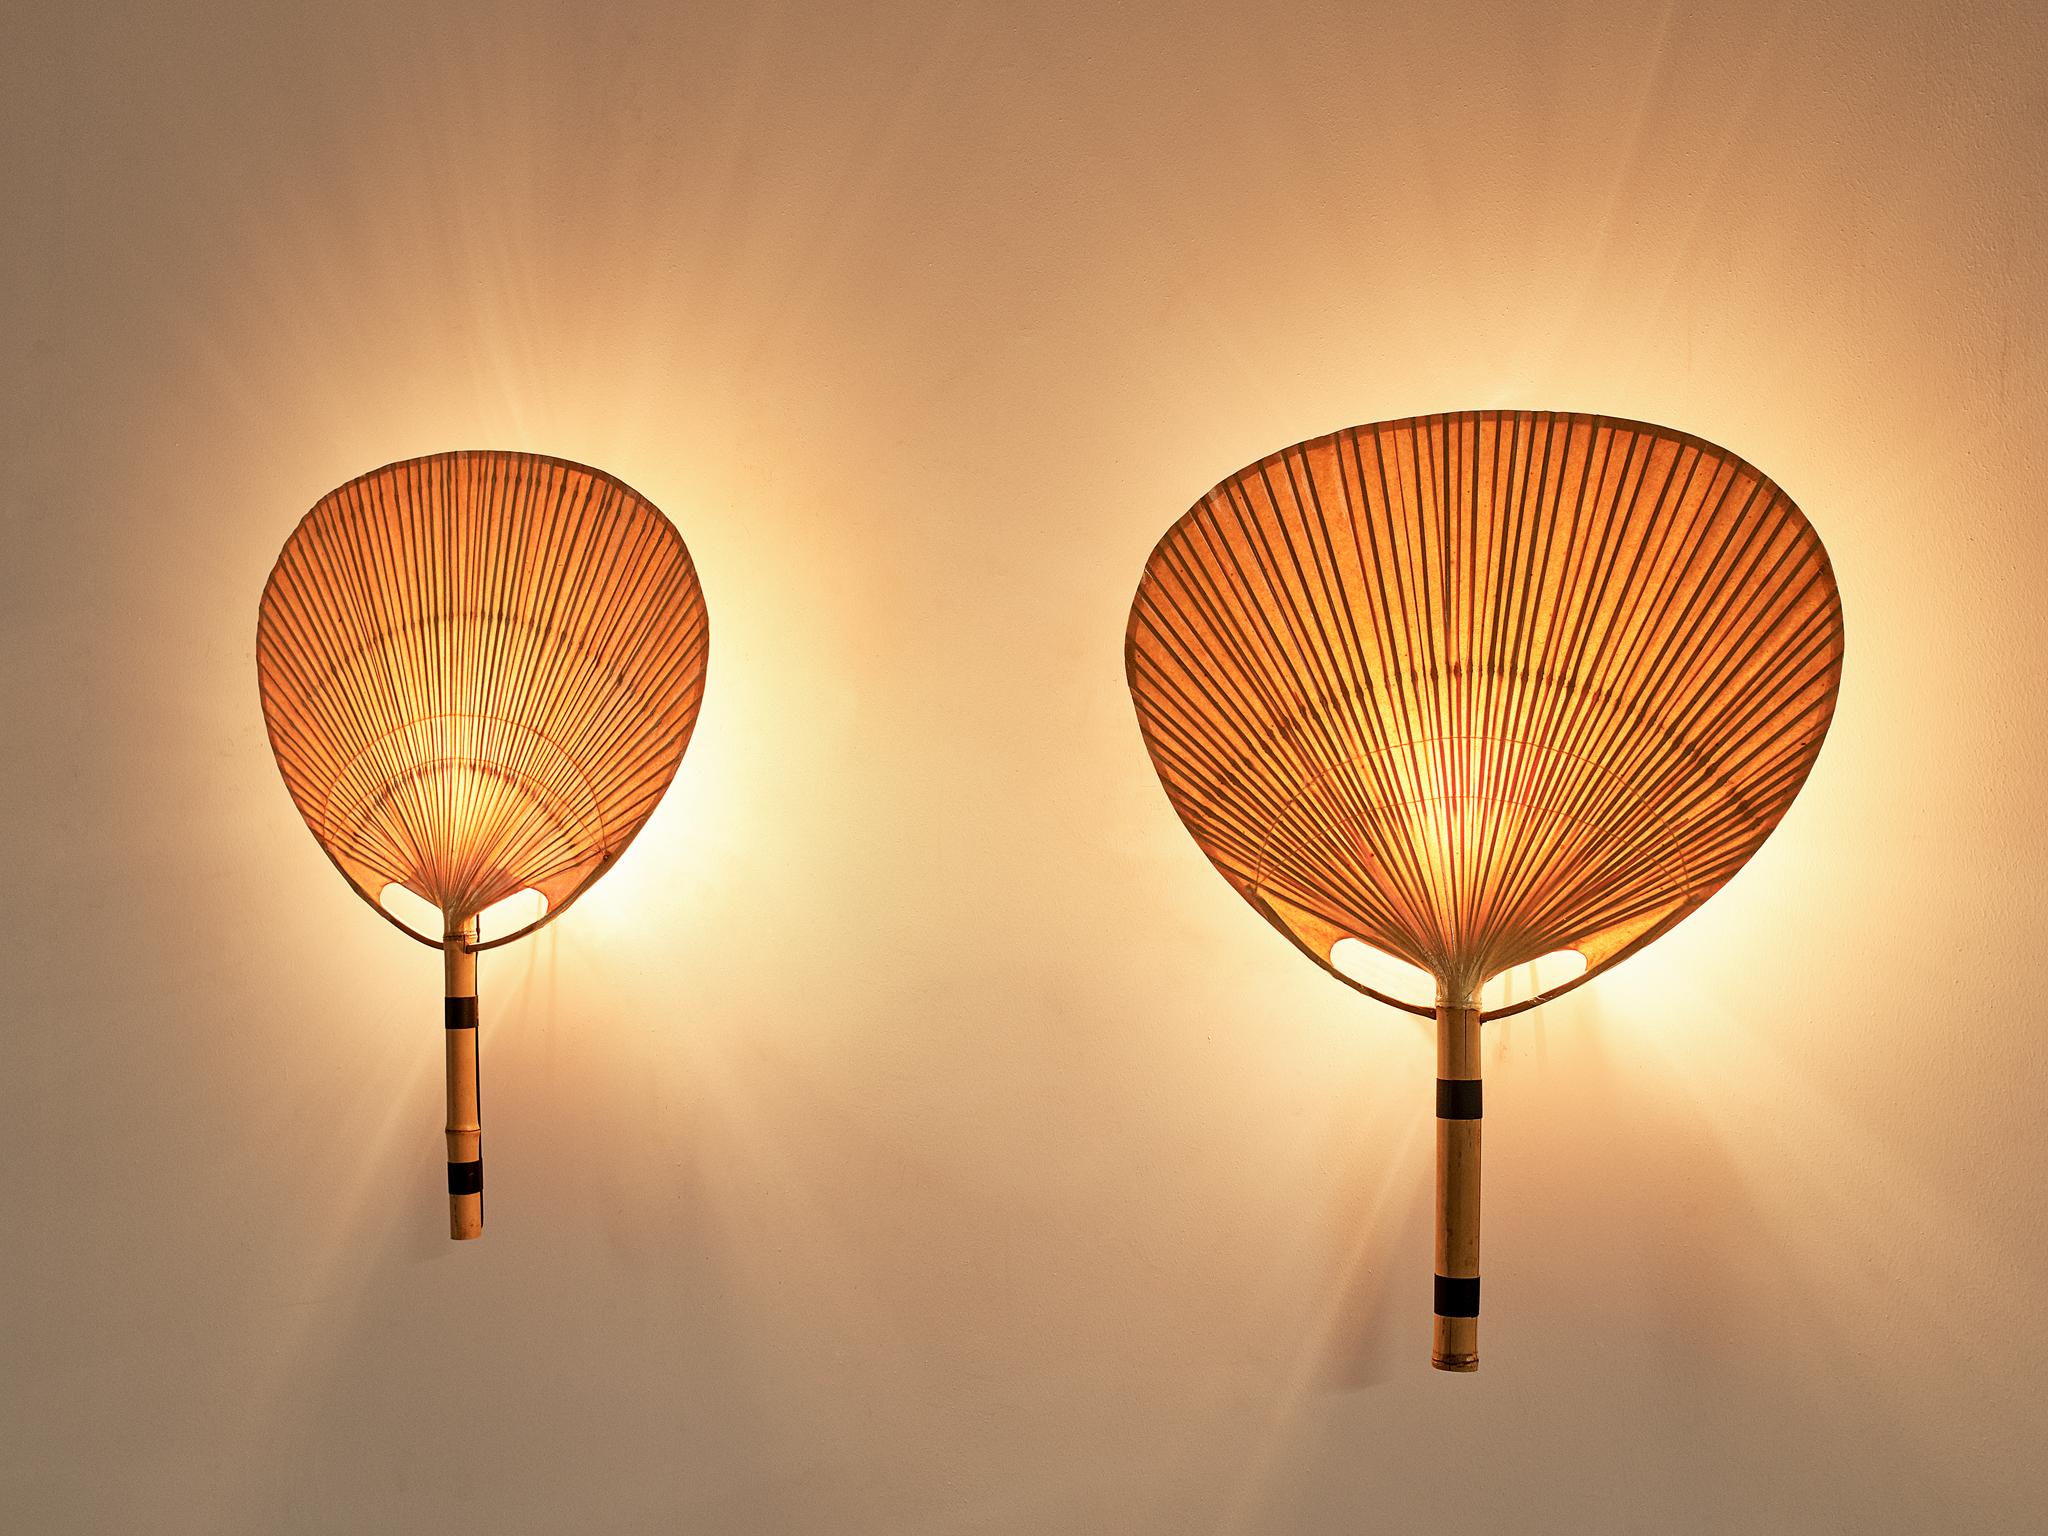 Ingo Maurer for M design, pair of 'Uchiwa III' wall lights, bamboo, ricepaper and wicker, Germany, 1973.

An refined set of two wall lights by Ingo Maurer, executed in bamboo and rice paper. Maurer was fascinated by the phenomenon of light and was